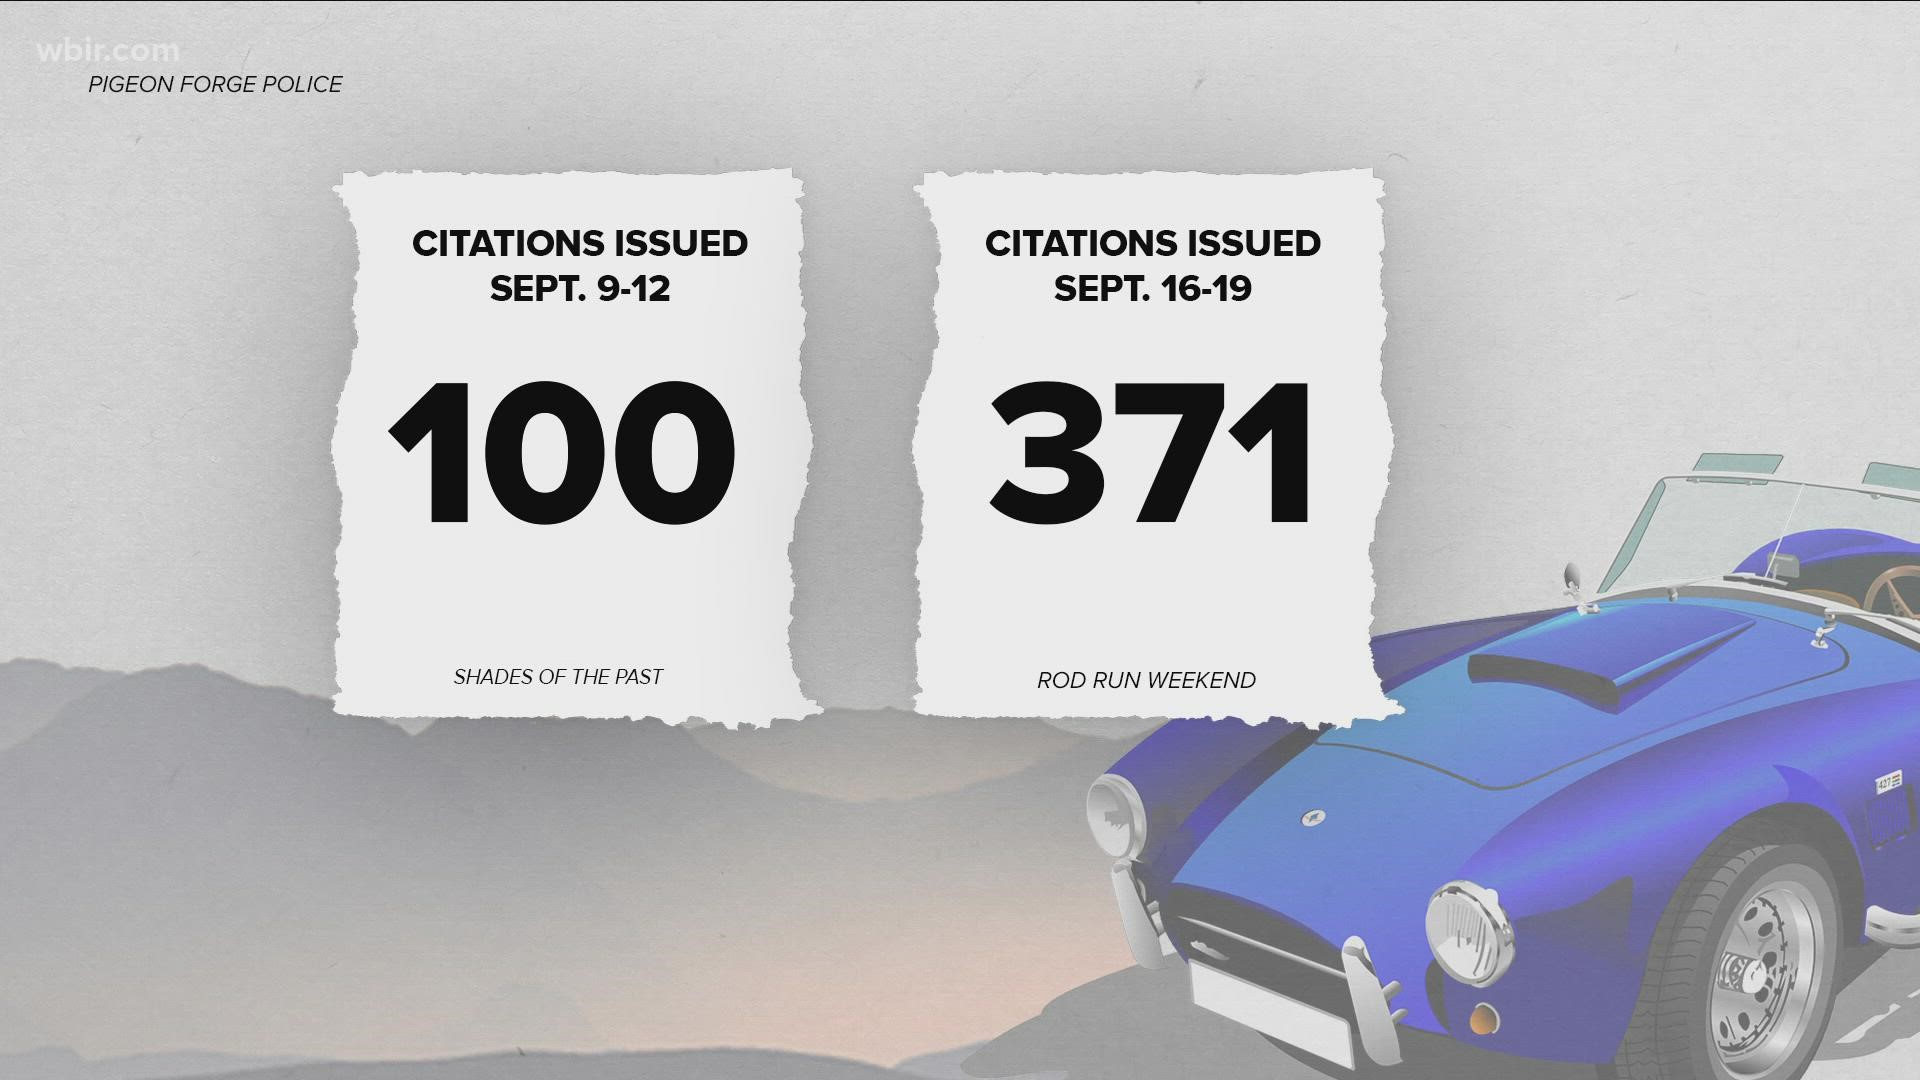 The weekend before Rod Run also saw 100 citations issued, during the Shades of the Past car show event.